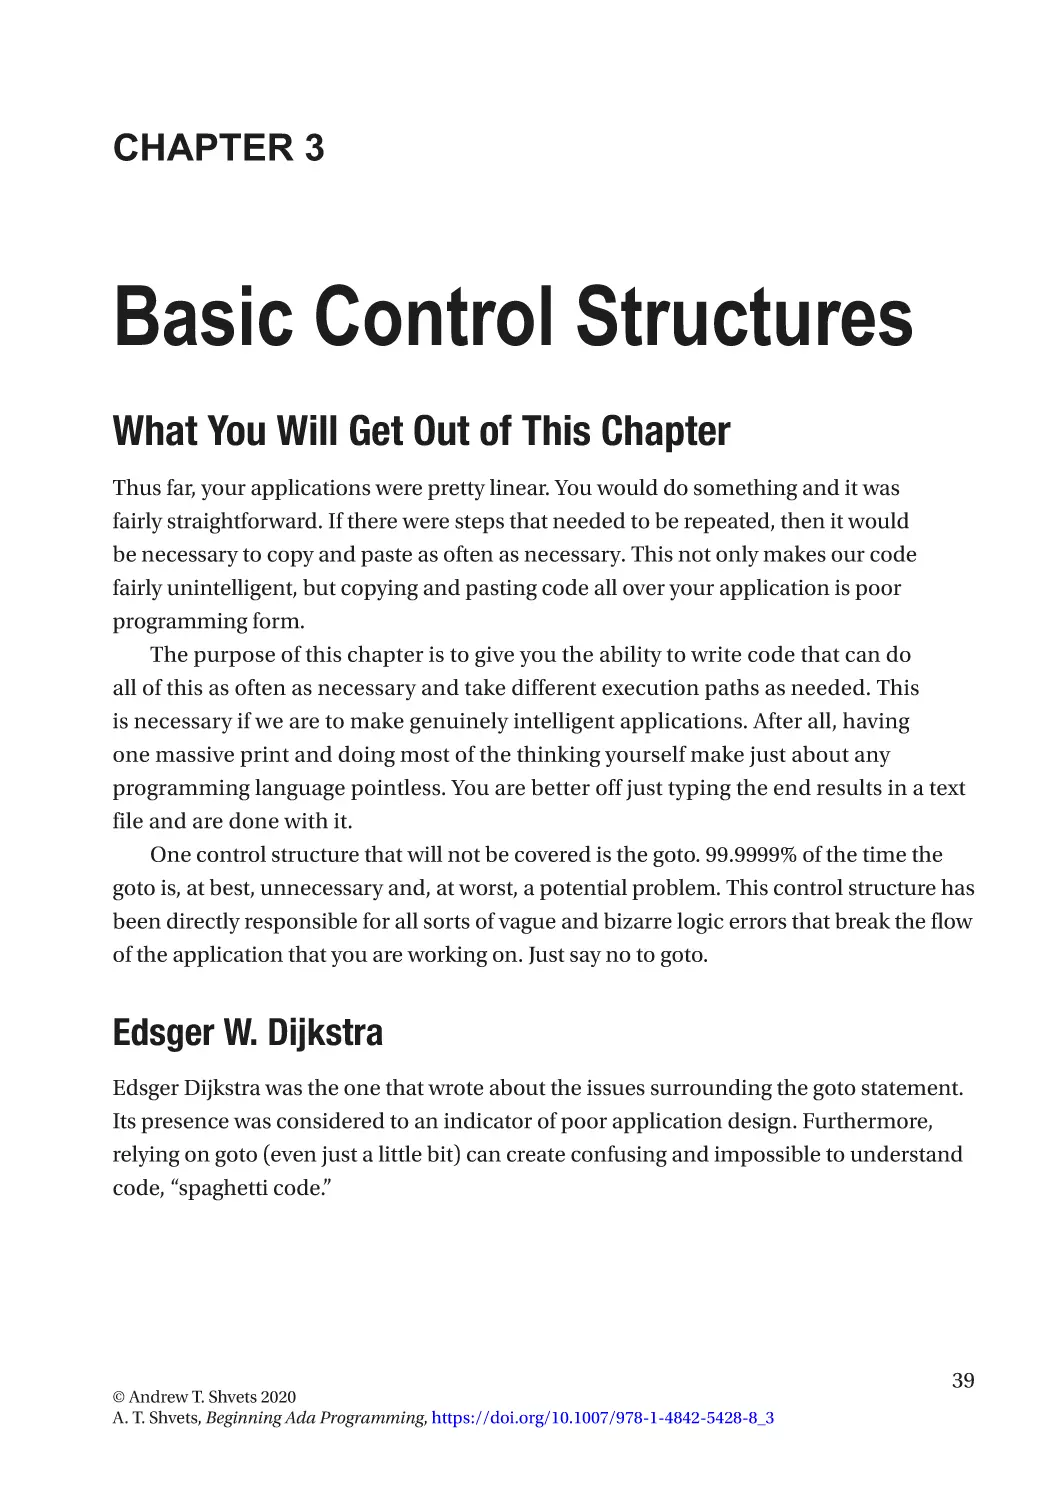 Chapter 3
What You Will Get Out of This Chapter
Edsger W. Dijkstra